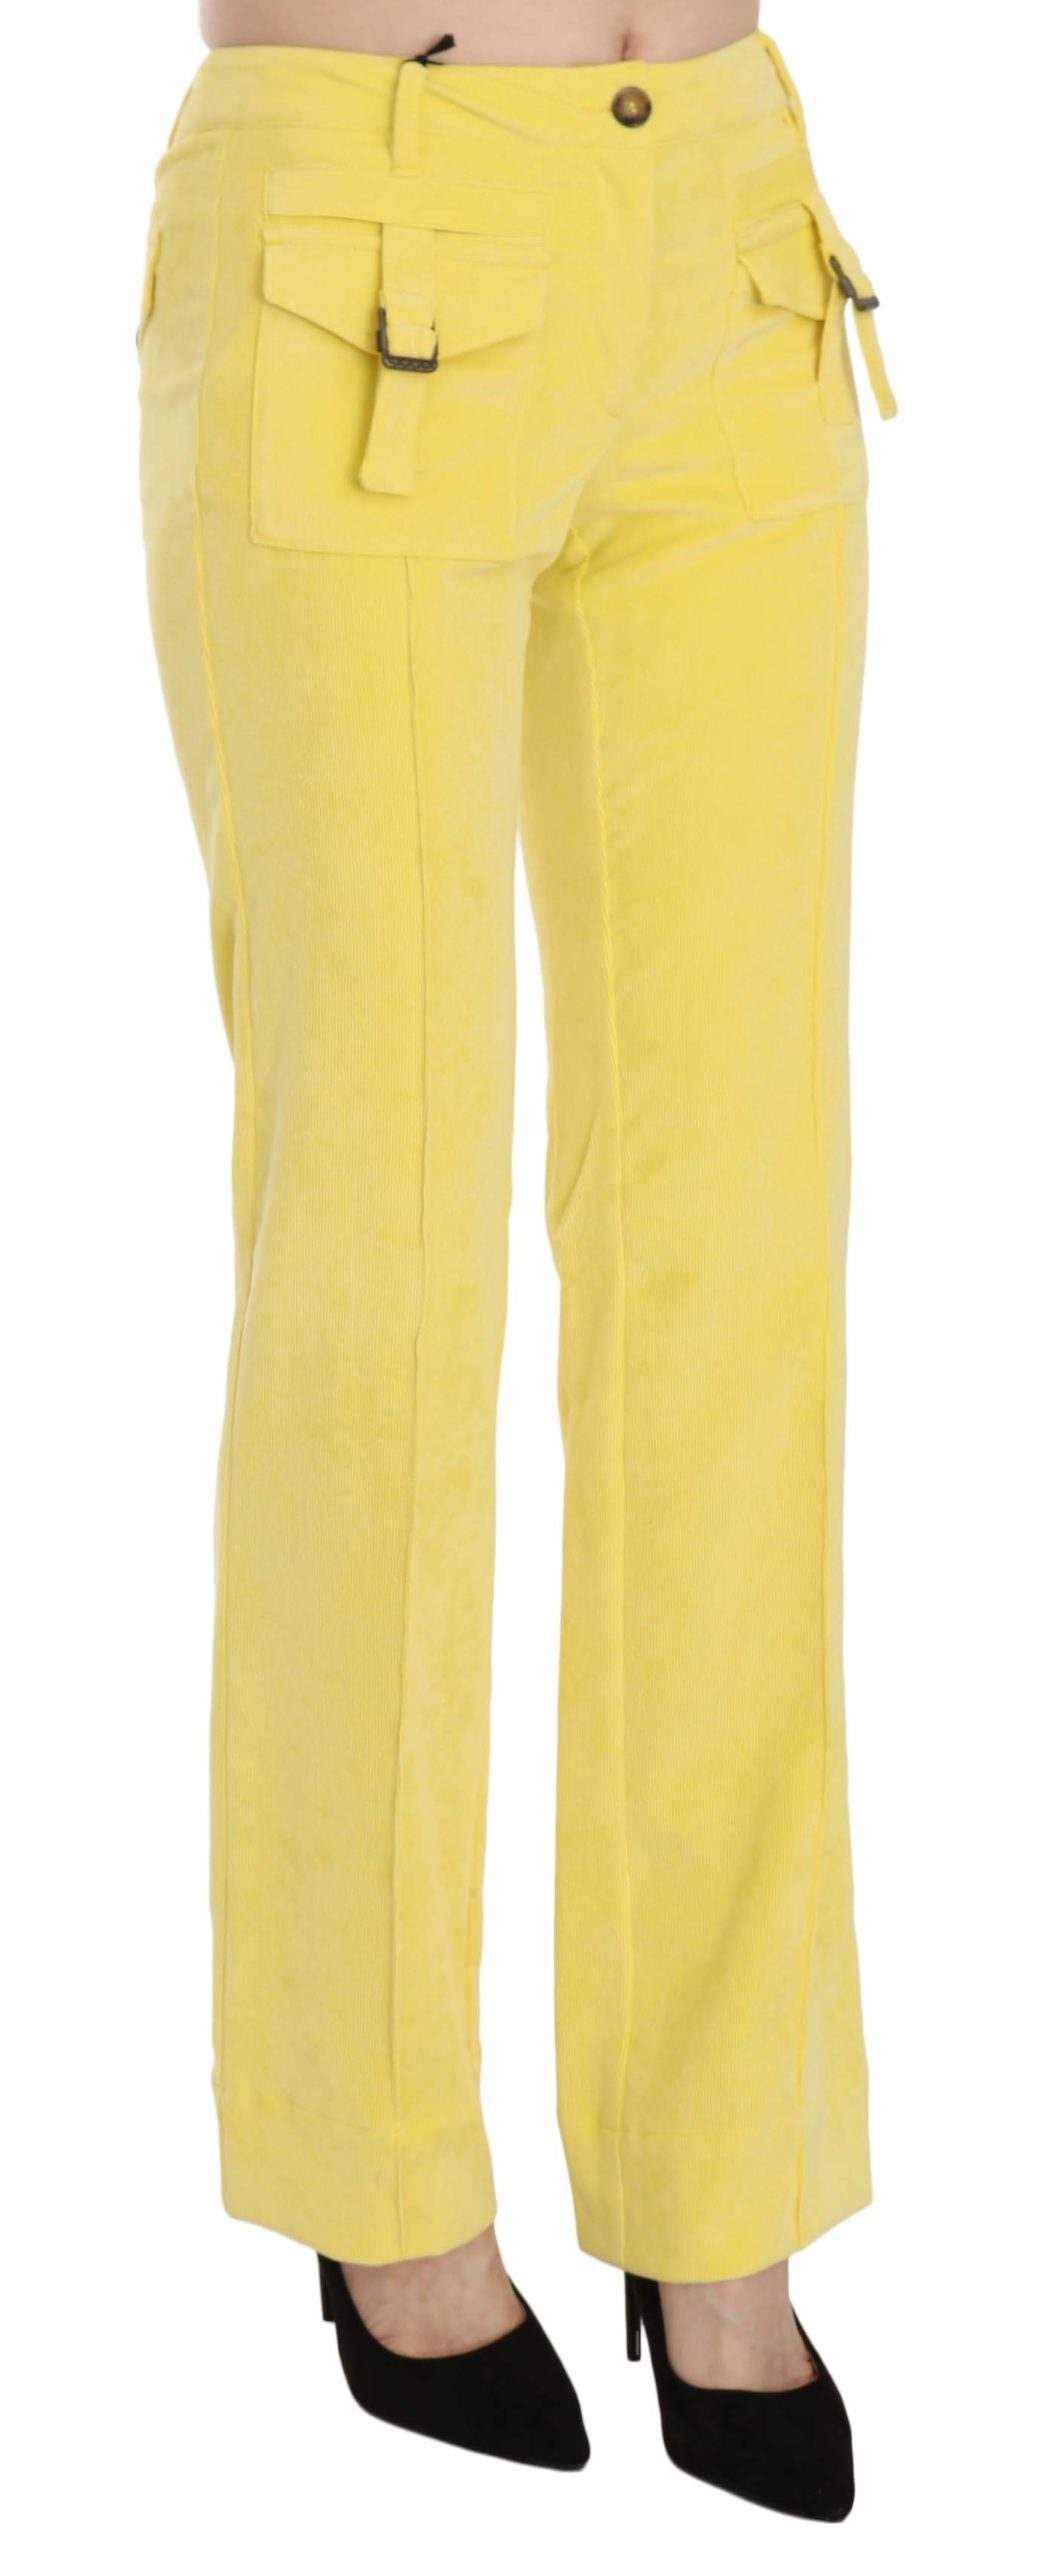 Just Cavalli  Corduroy Mid Waist Straight Trousers Pants #women, Catch, feed-agegroup-adult, feed-color-yellow, feed-gender-female, feed-size-IT38|XS, feed-size-IT40|S, feed-size-IT46|XL, Gender_Women, IT38|XS, IT40|S, IT46|XL, Jeans & Pants - Women - Clothing, Just Cavalli, Kogan, Women - New Arrivals, Yellow at SEYMAYKA